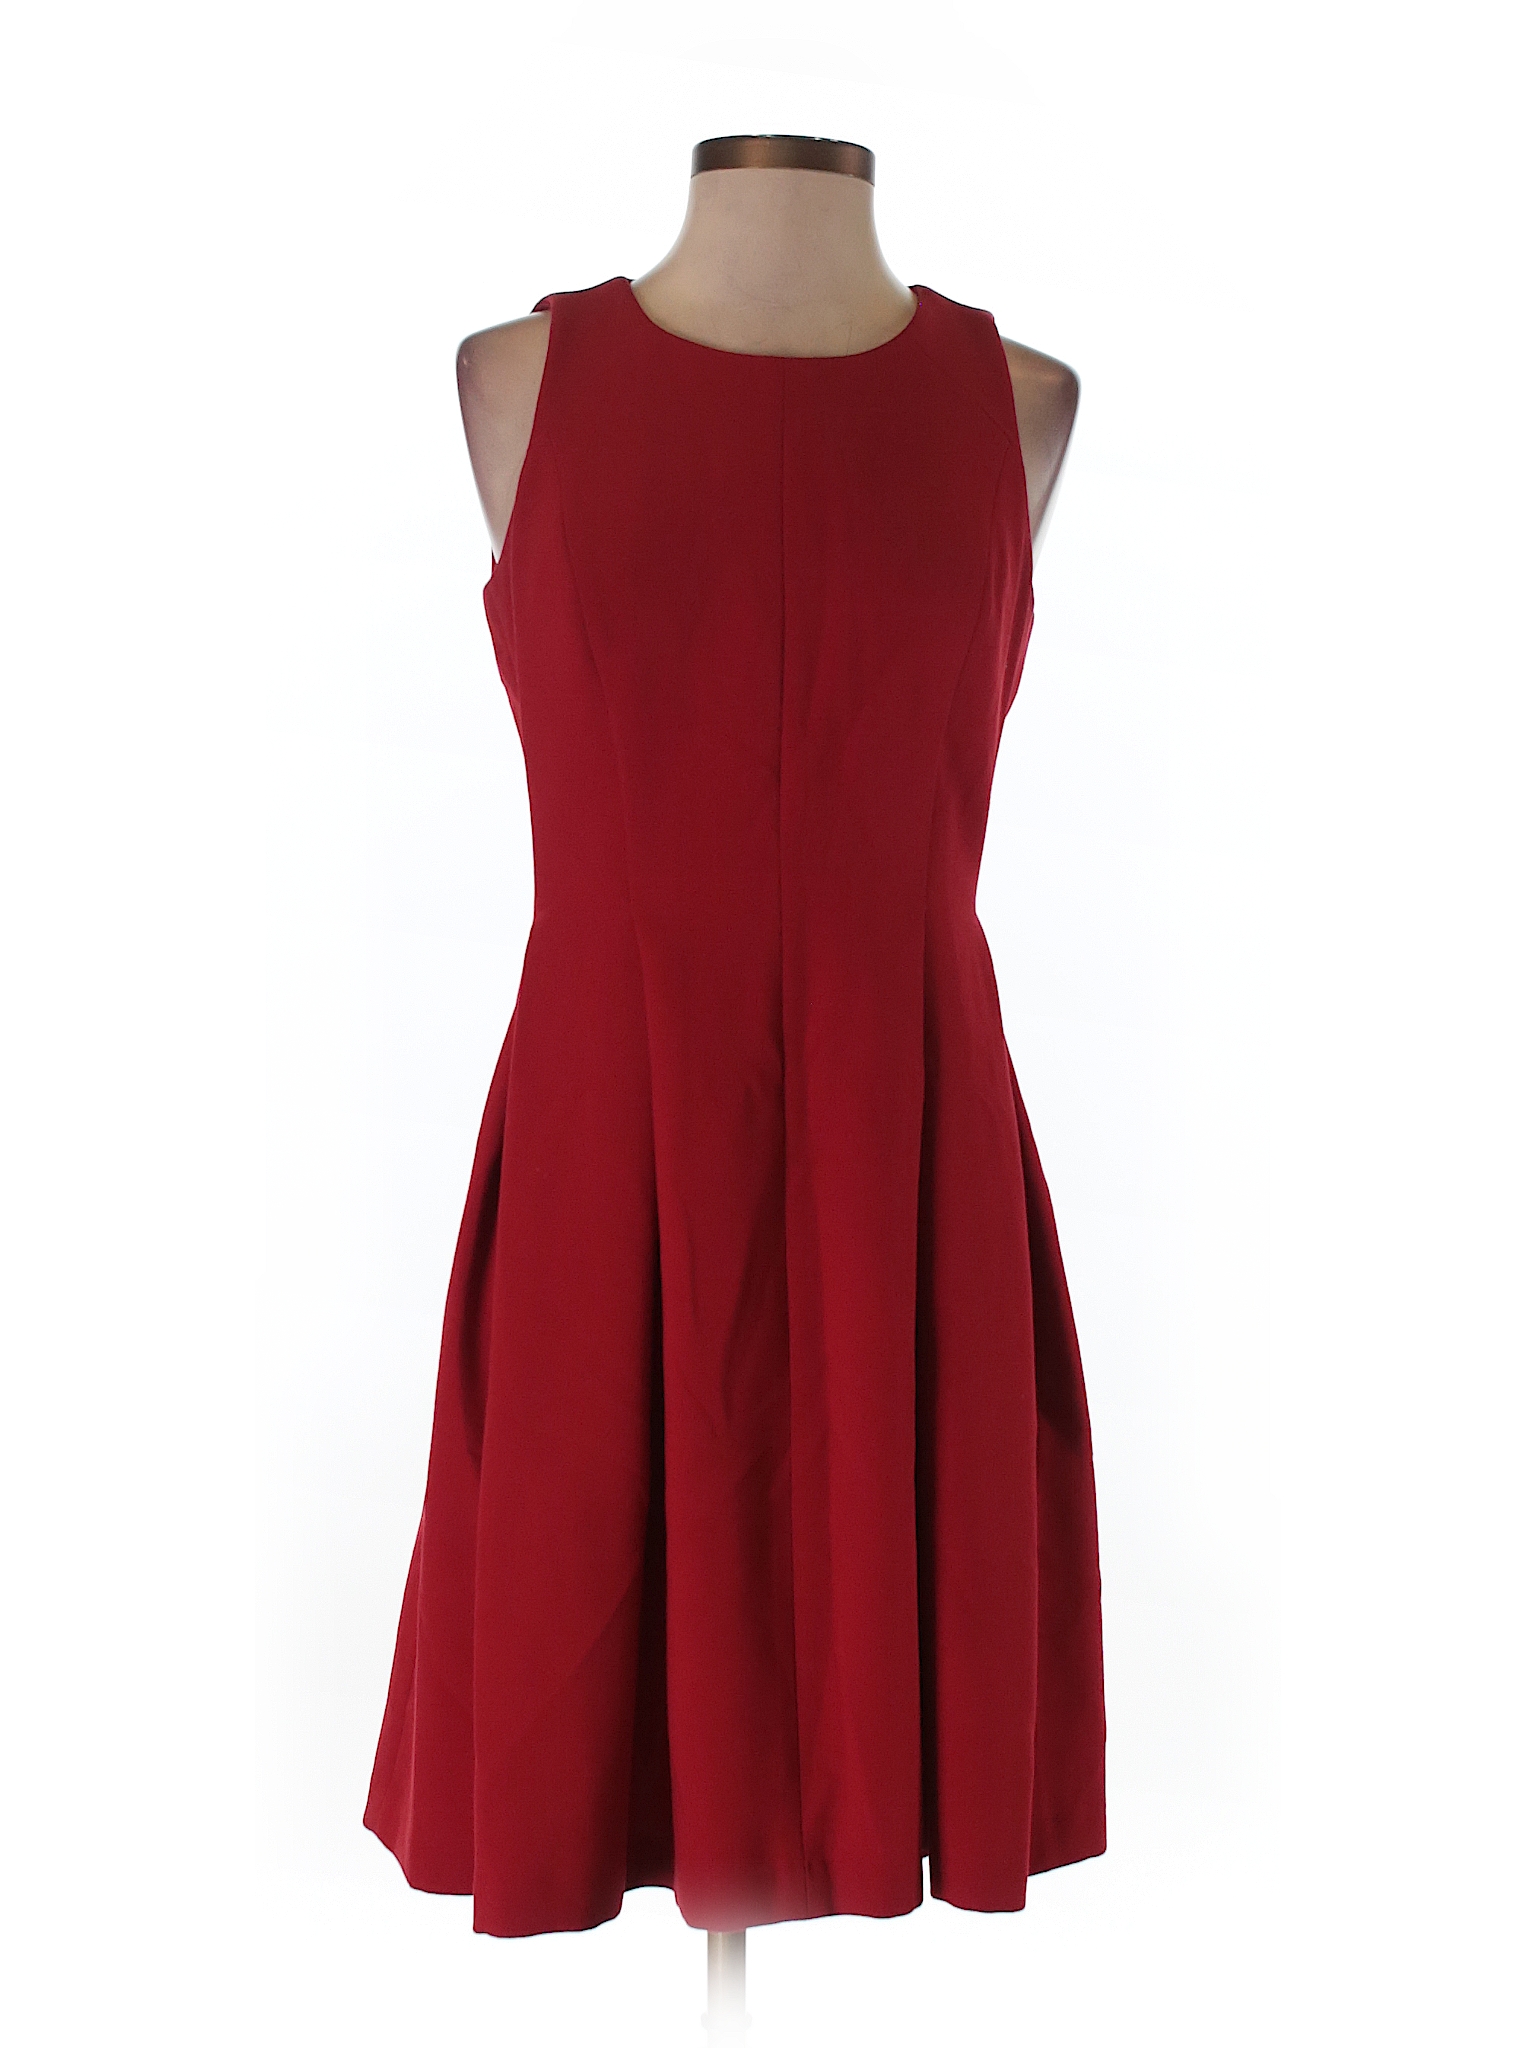 Ann Taylor LOFT Solid Red Casual Dress Size 2 - 73% off | thredUP